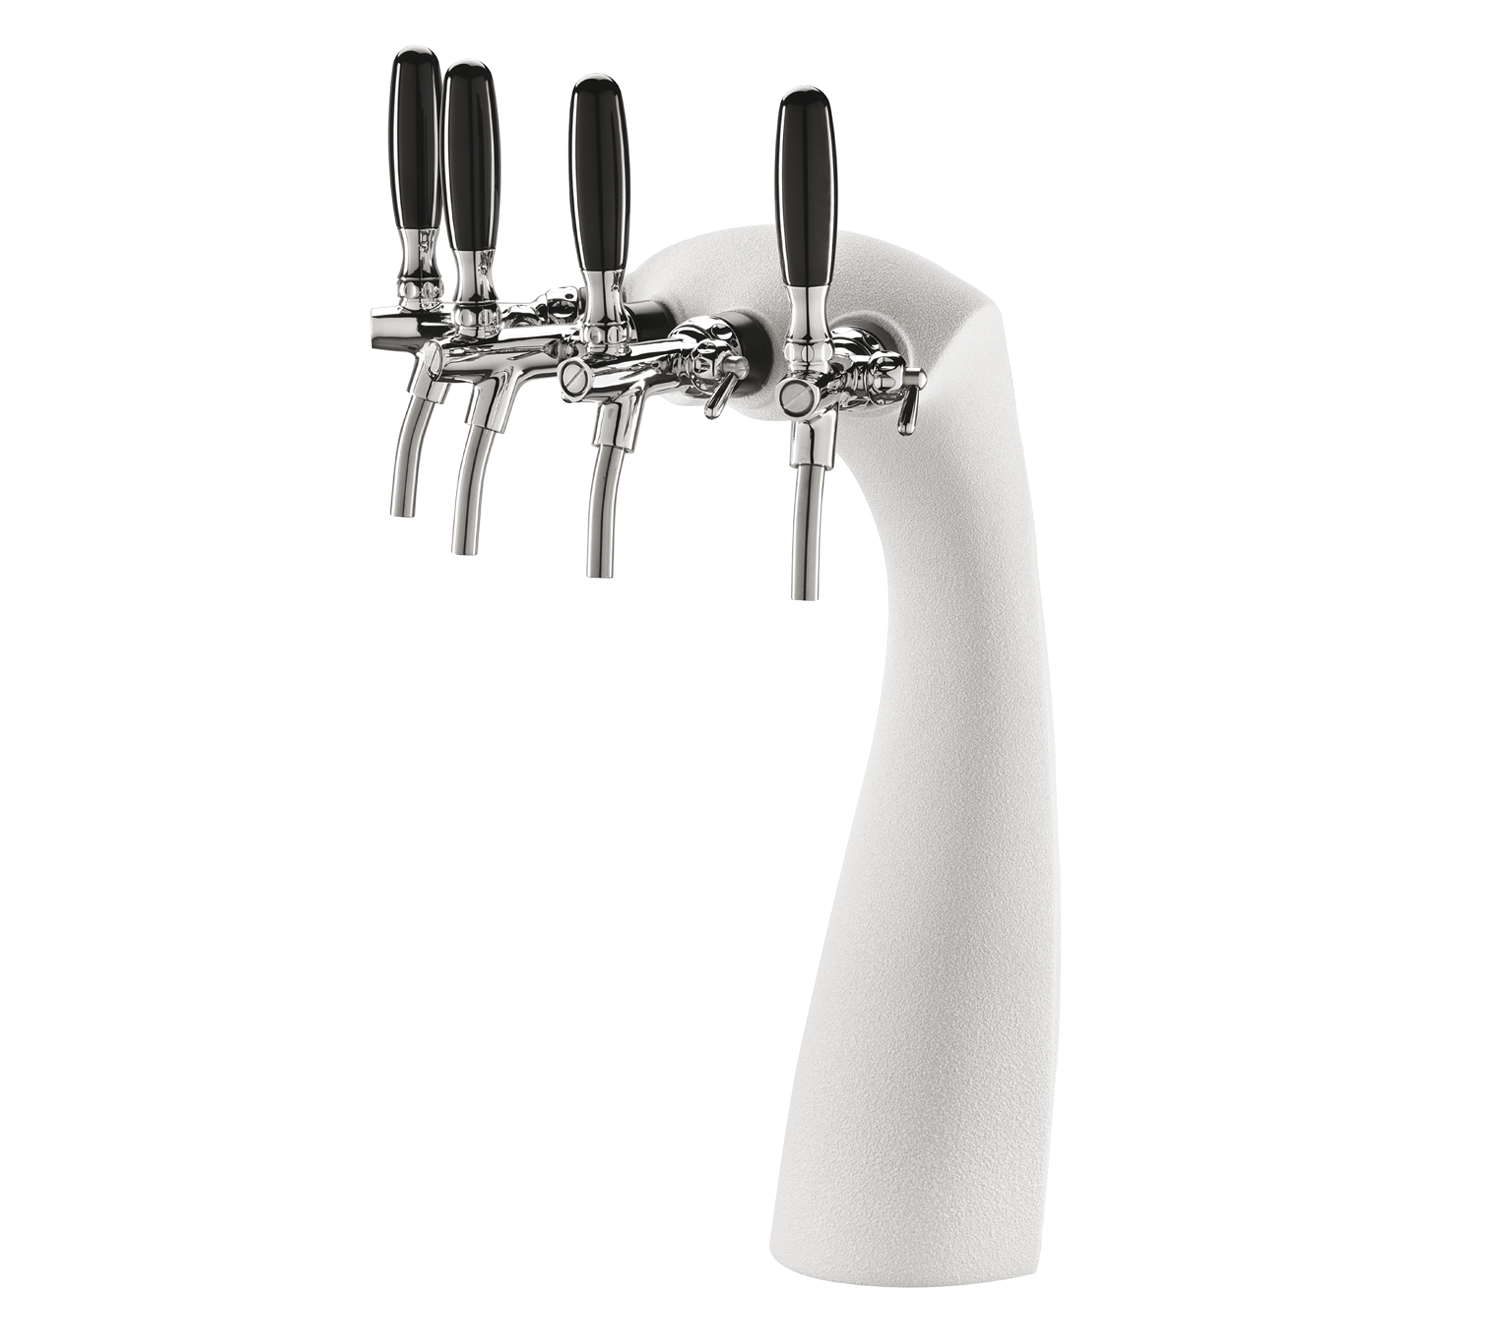 CELLI Delta 4 - Four-way dispensing beer tower